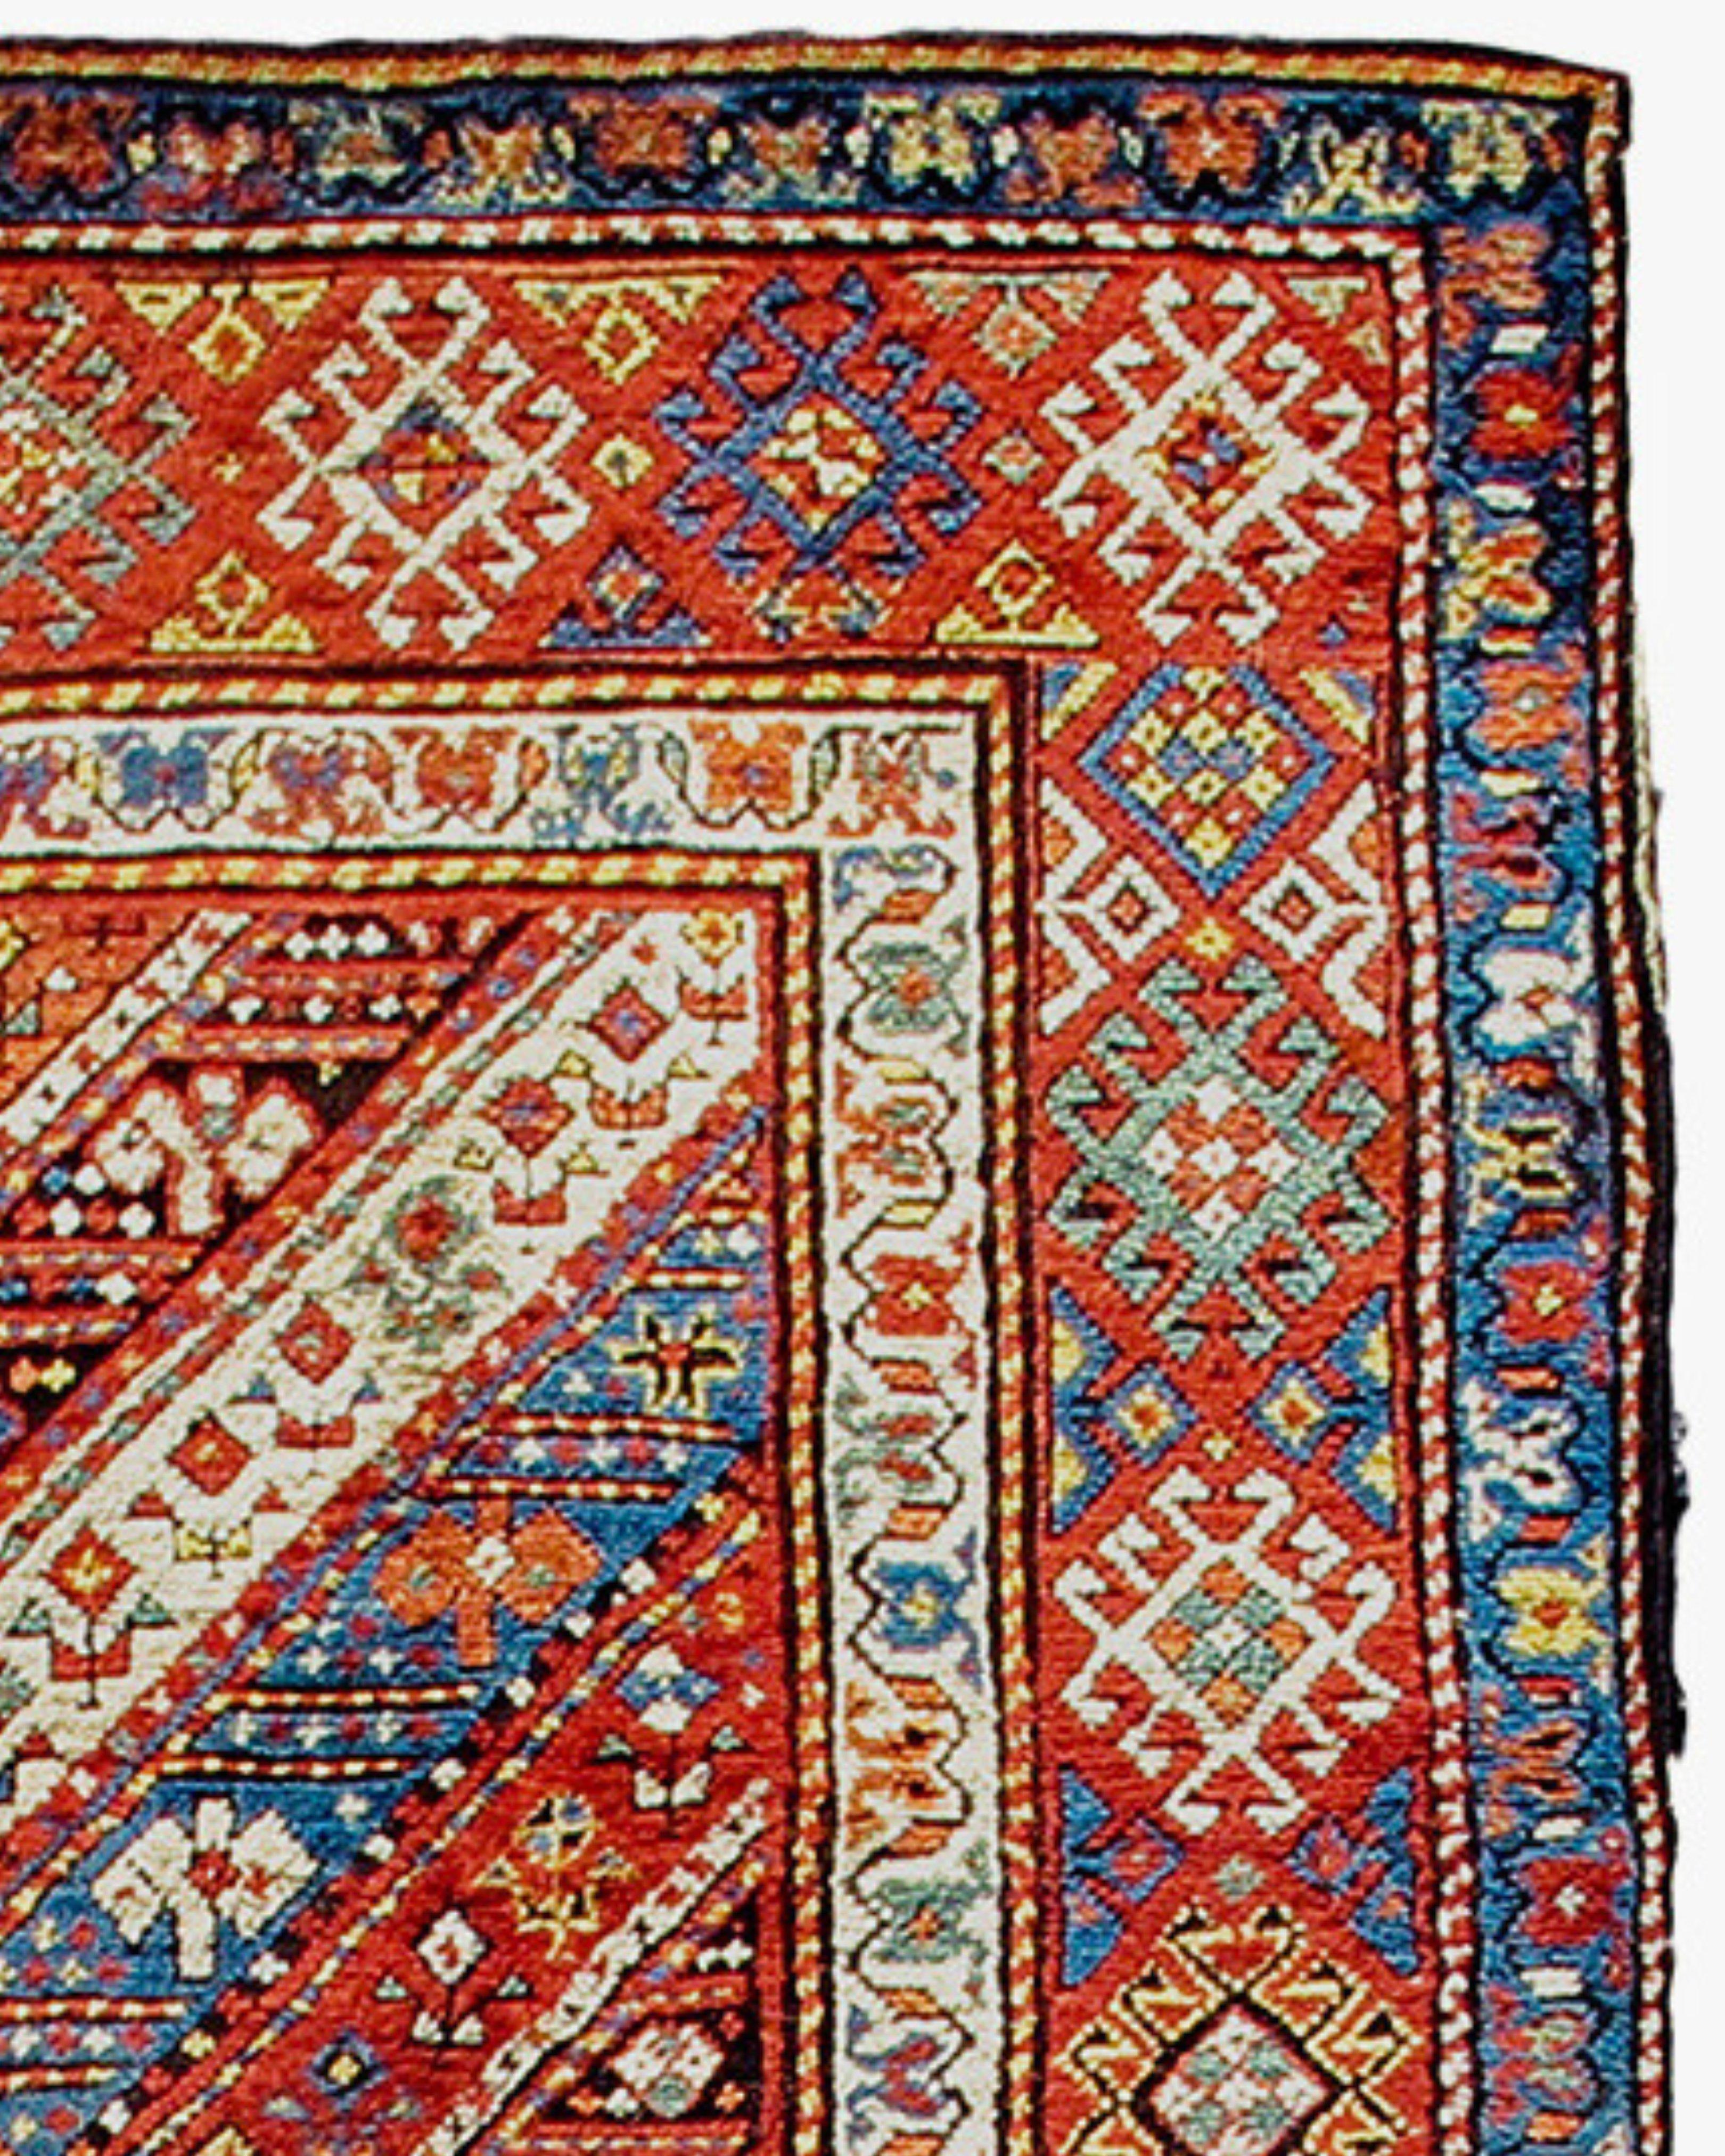 Antique Gendje Rug, Late 19th Century

Additional Information:
Dimensions: 3'7